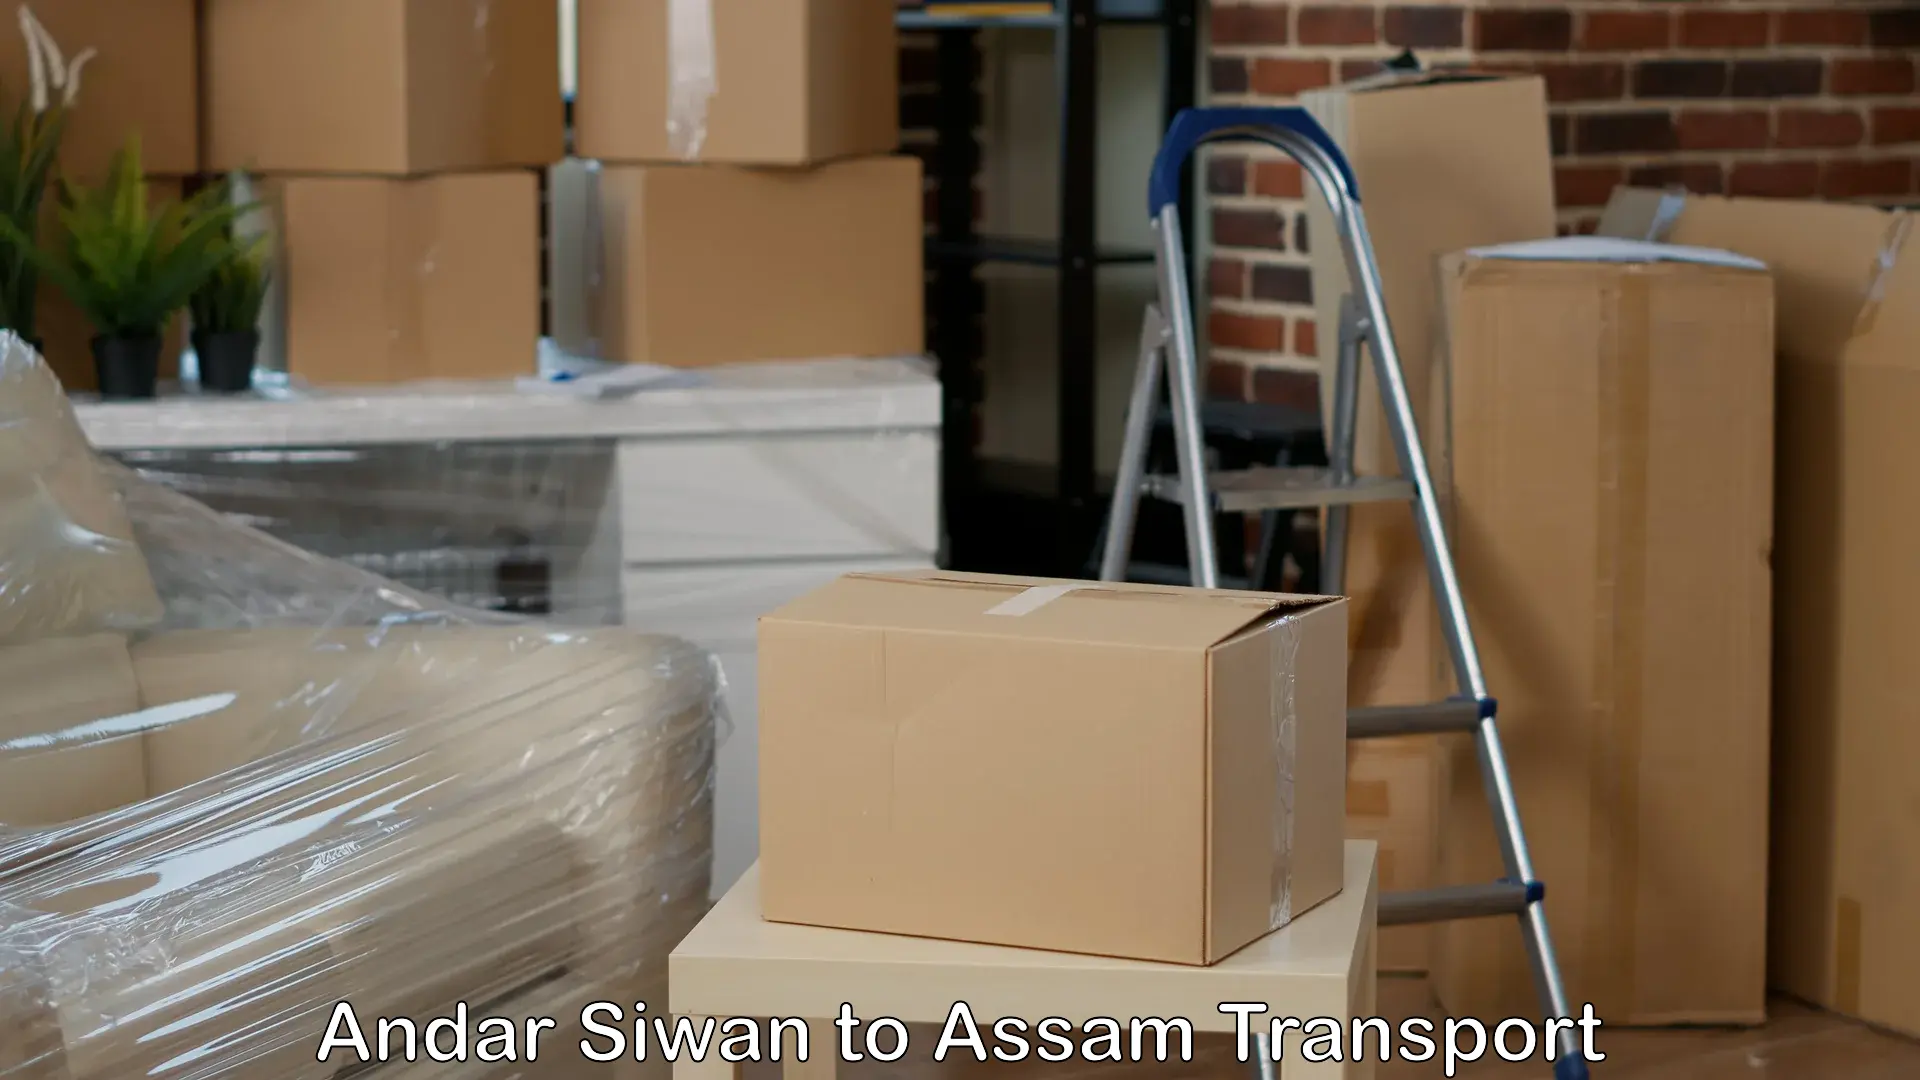 Two wheeler transport services Andar Siwan to Lala Assam